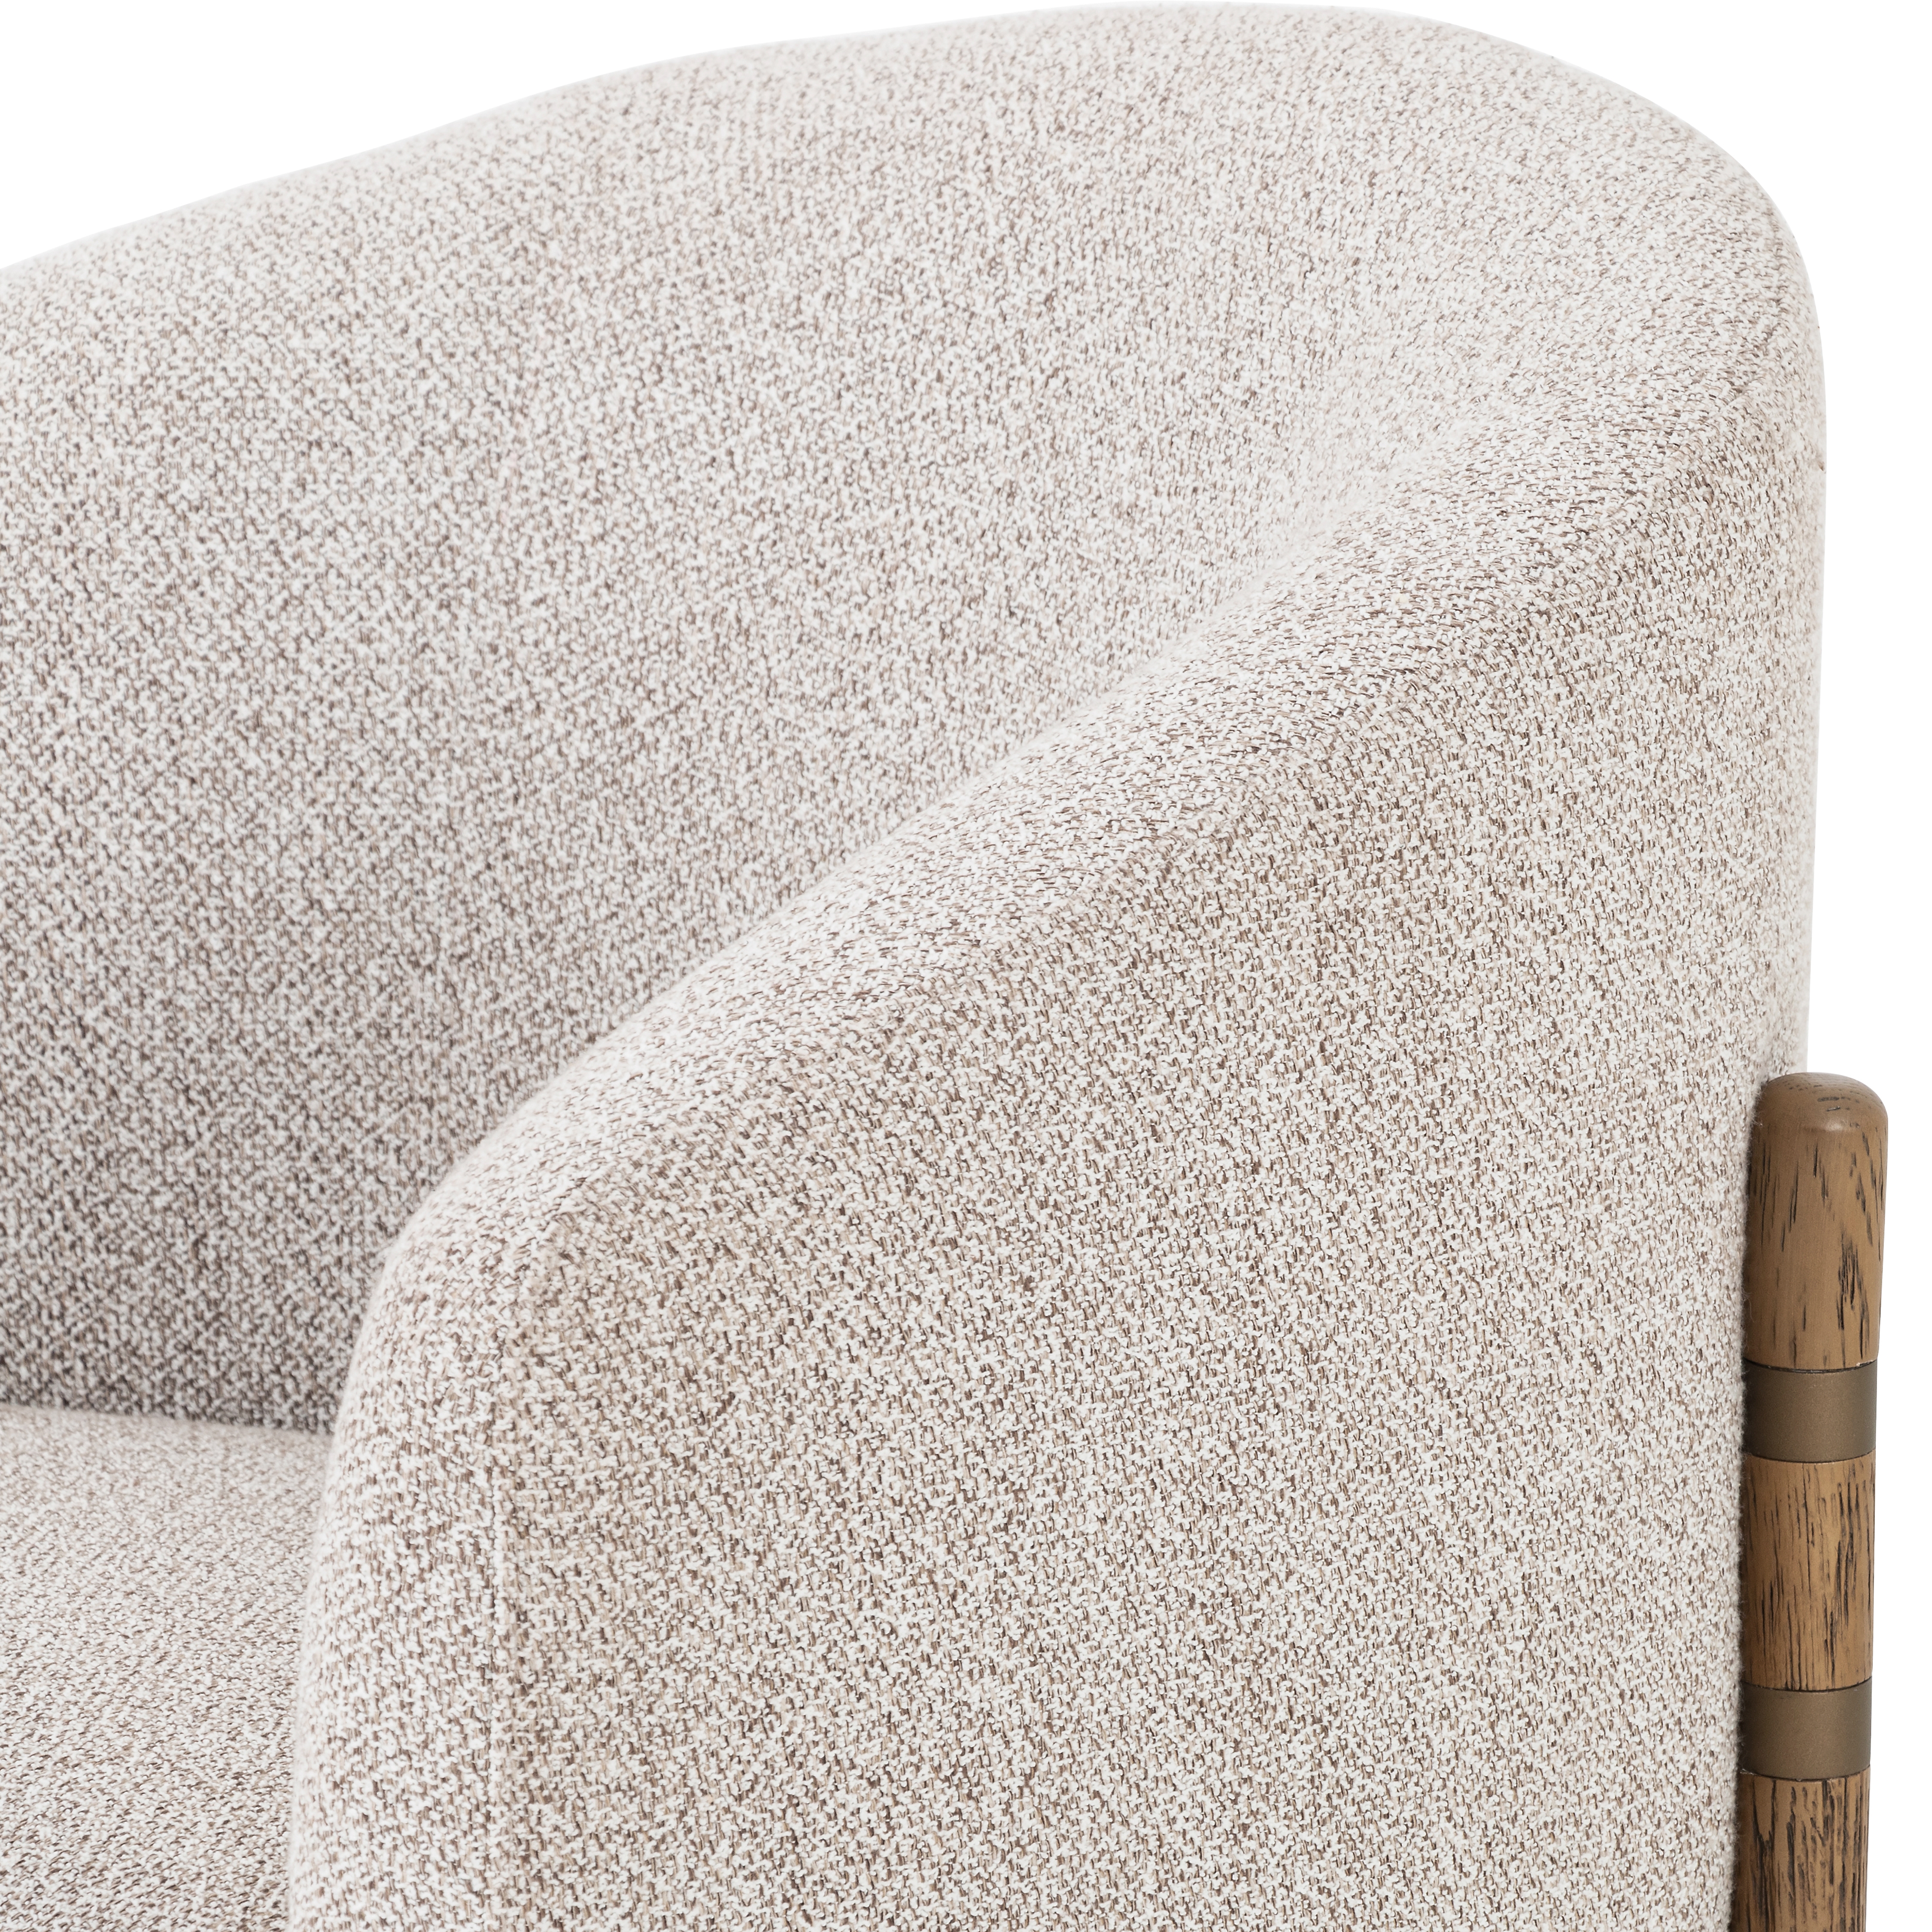 Enfield Chair-Astor Stone - Image 3